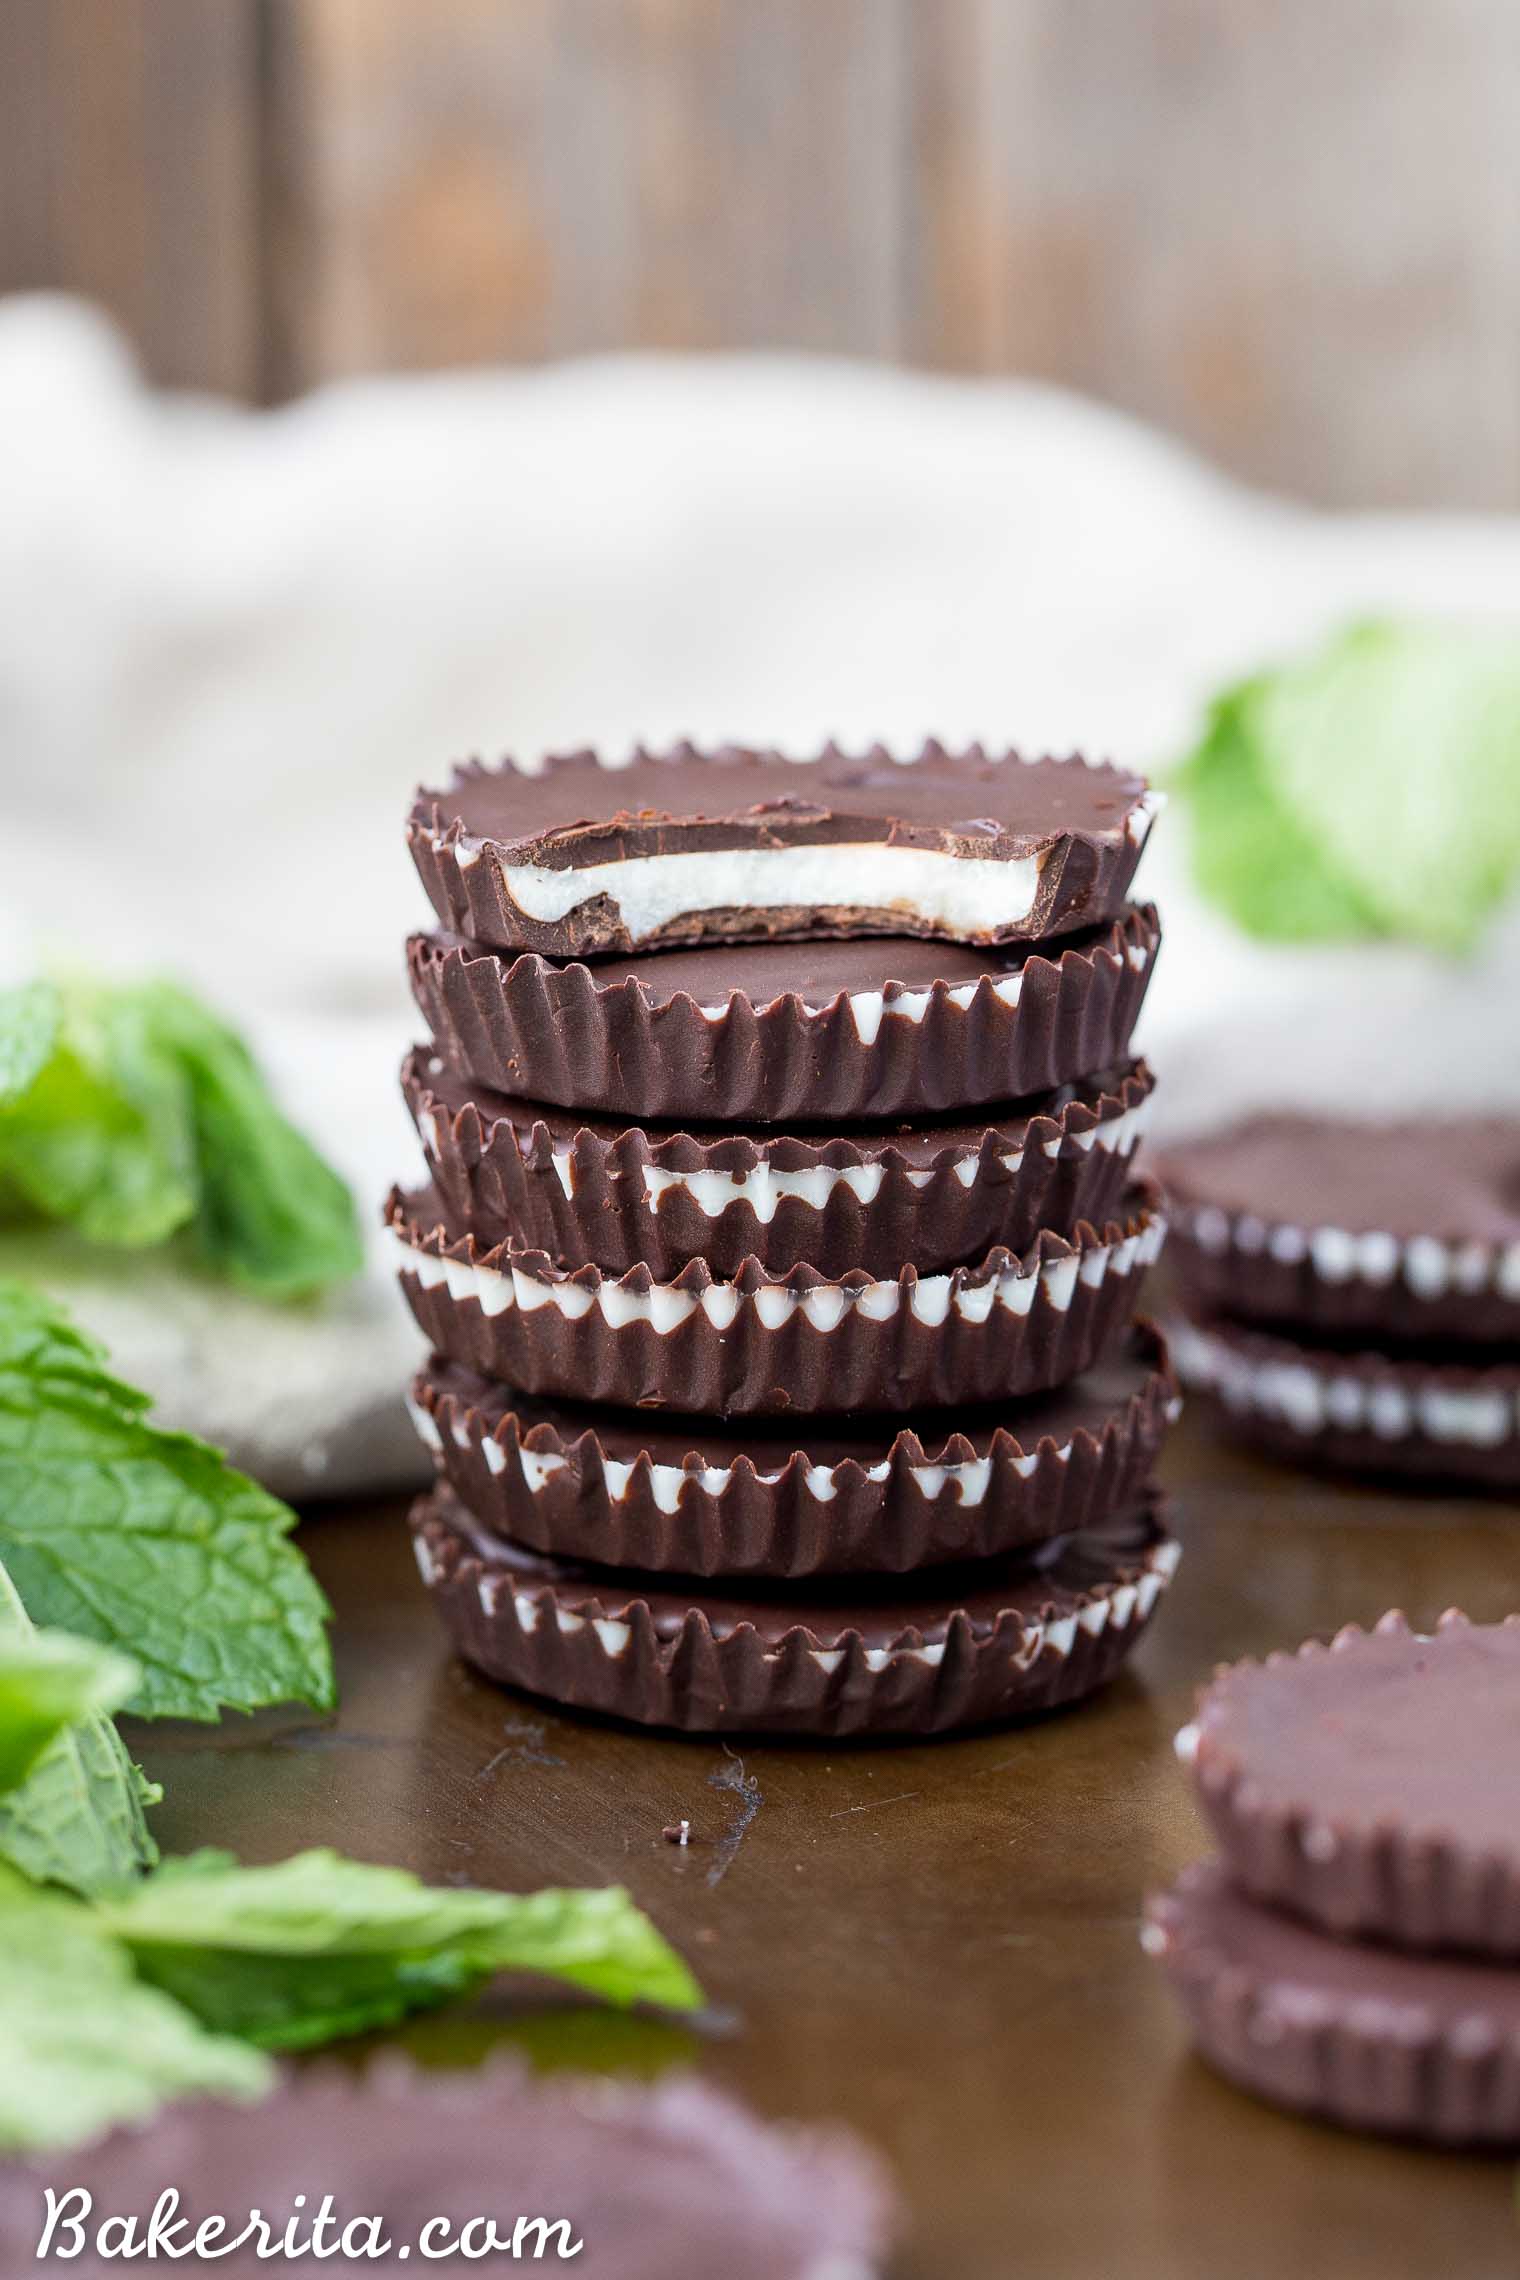 These Chocolate Peppermint Cups have a coconut butter peppermint filling, surrounded by homemade dark chocolate. You'll love these easy to make, gluten-free, paleo, and vegan homemade peppermint patties.